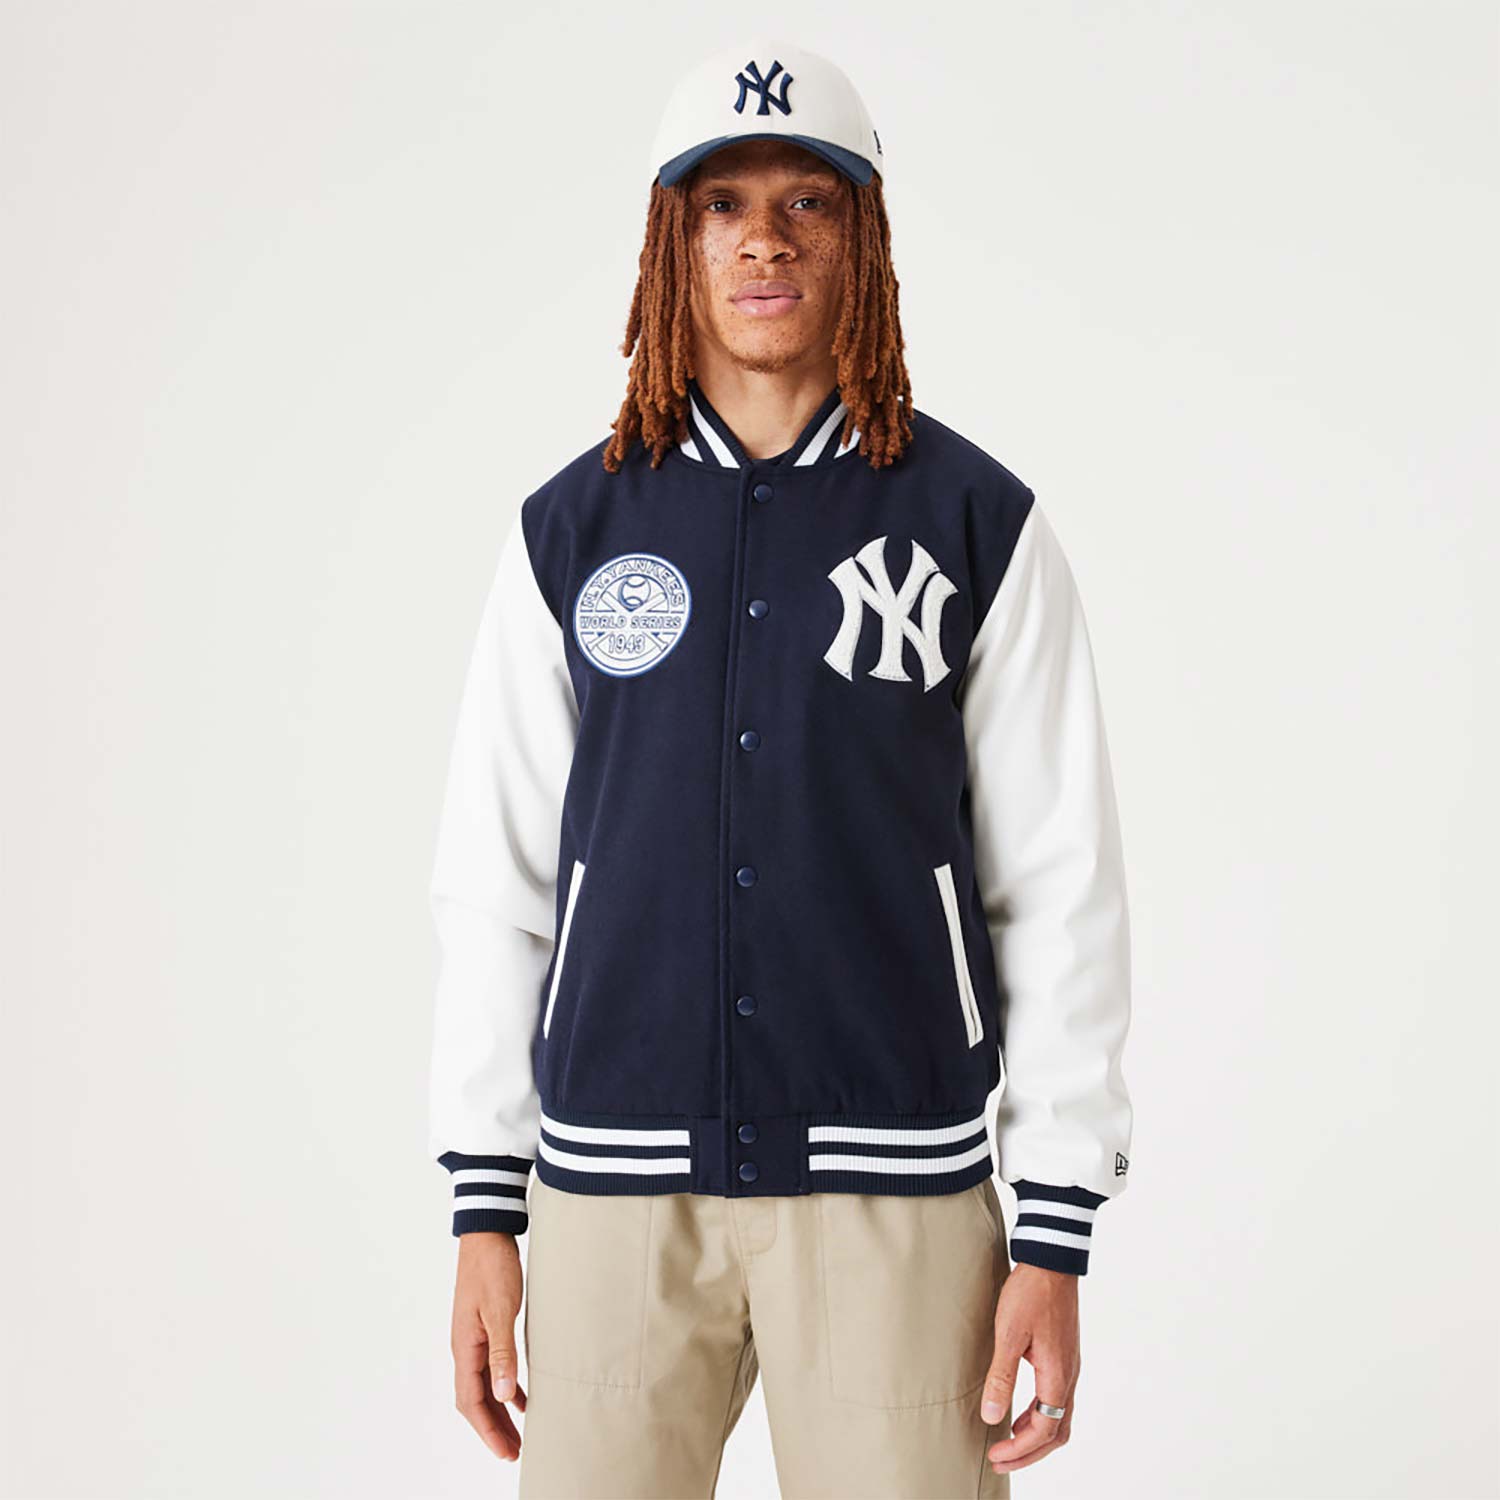 MLB Majestic New York Yankees Jacket Navy L  Chop Suey Official